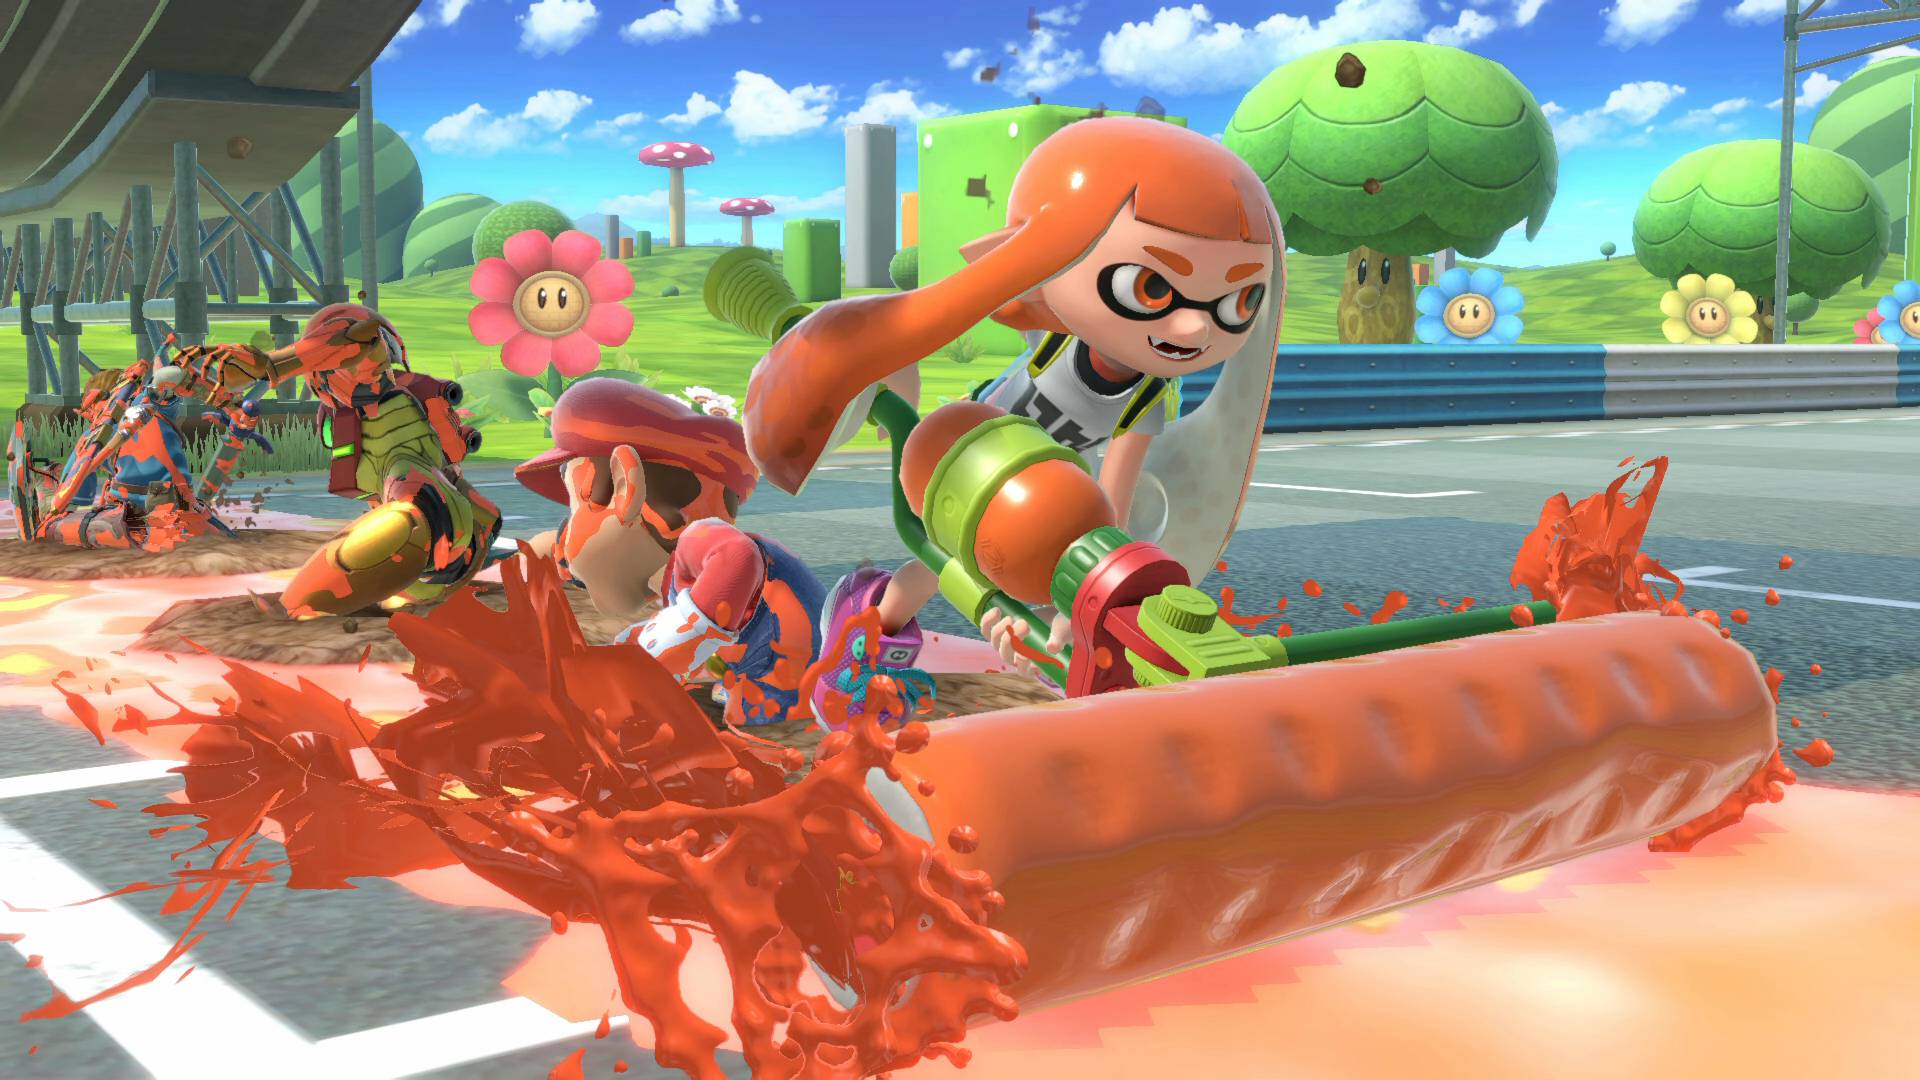 Best Nintendo Switch games: characters from Super Smash Bros fight it out 